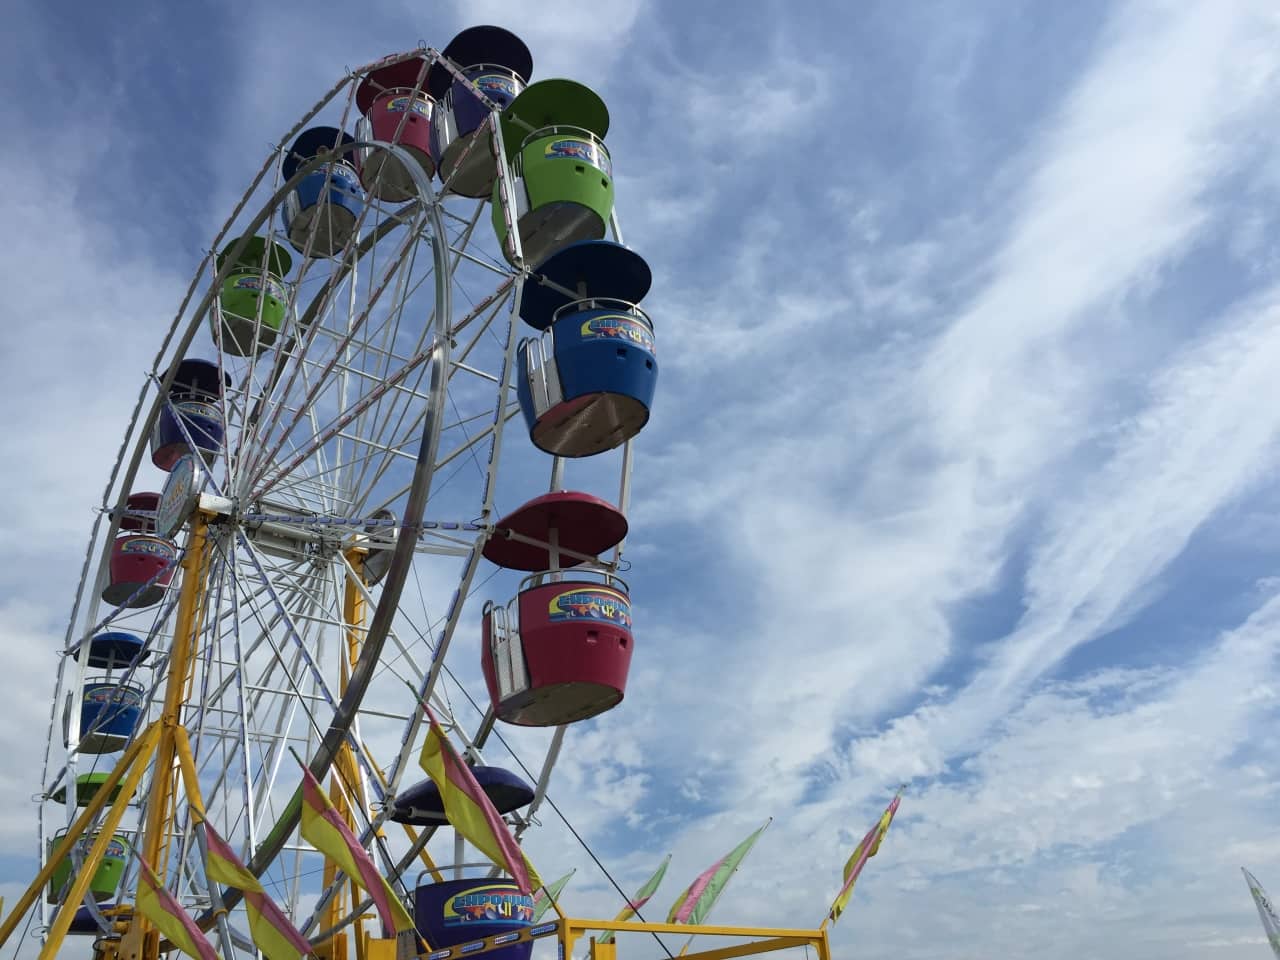 The carnival will feature rides, games of chance and food booths.